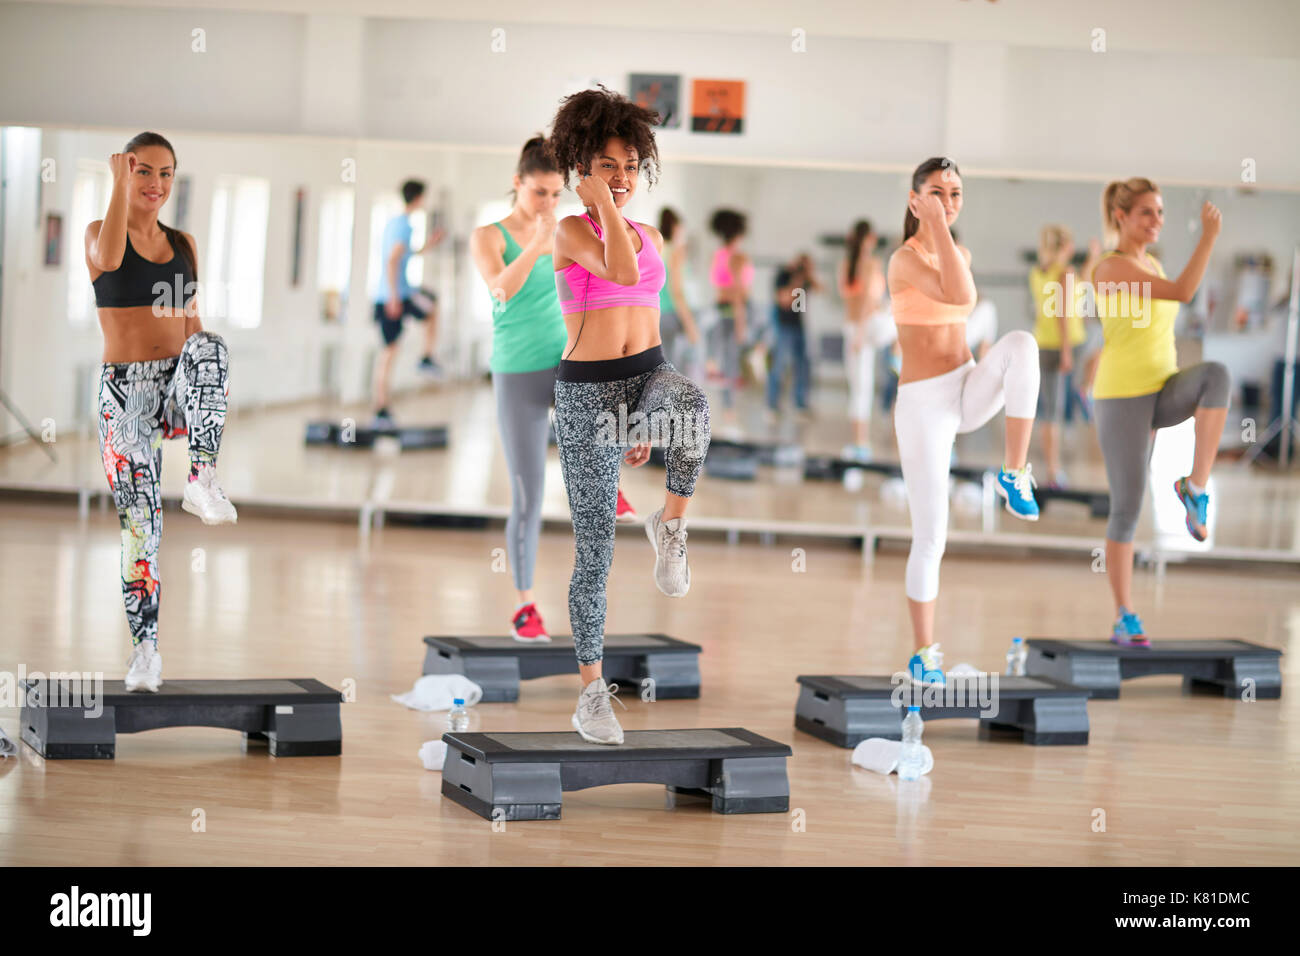 Fitness group training on stepper in colorful sportswear Stock Photo